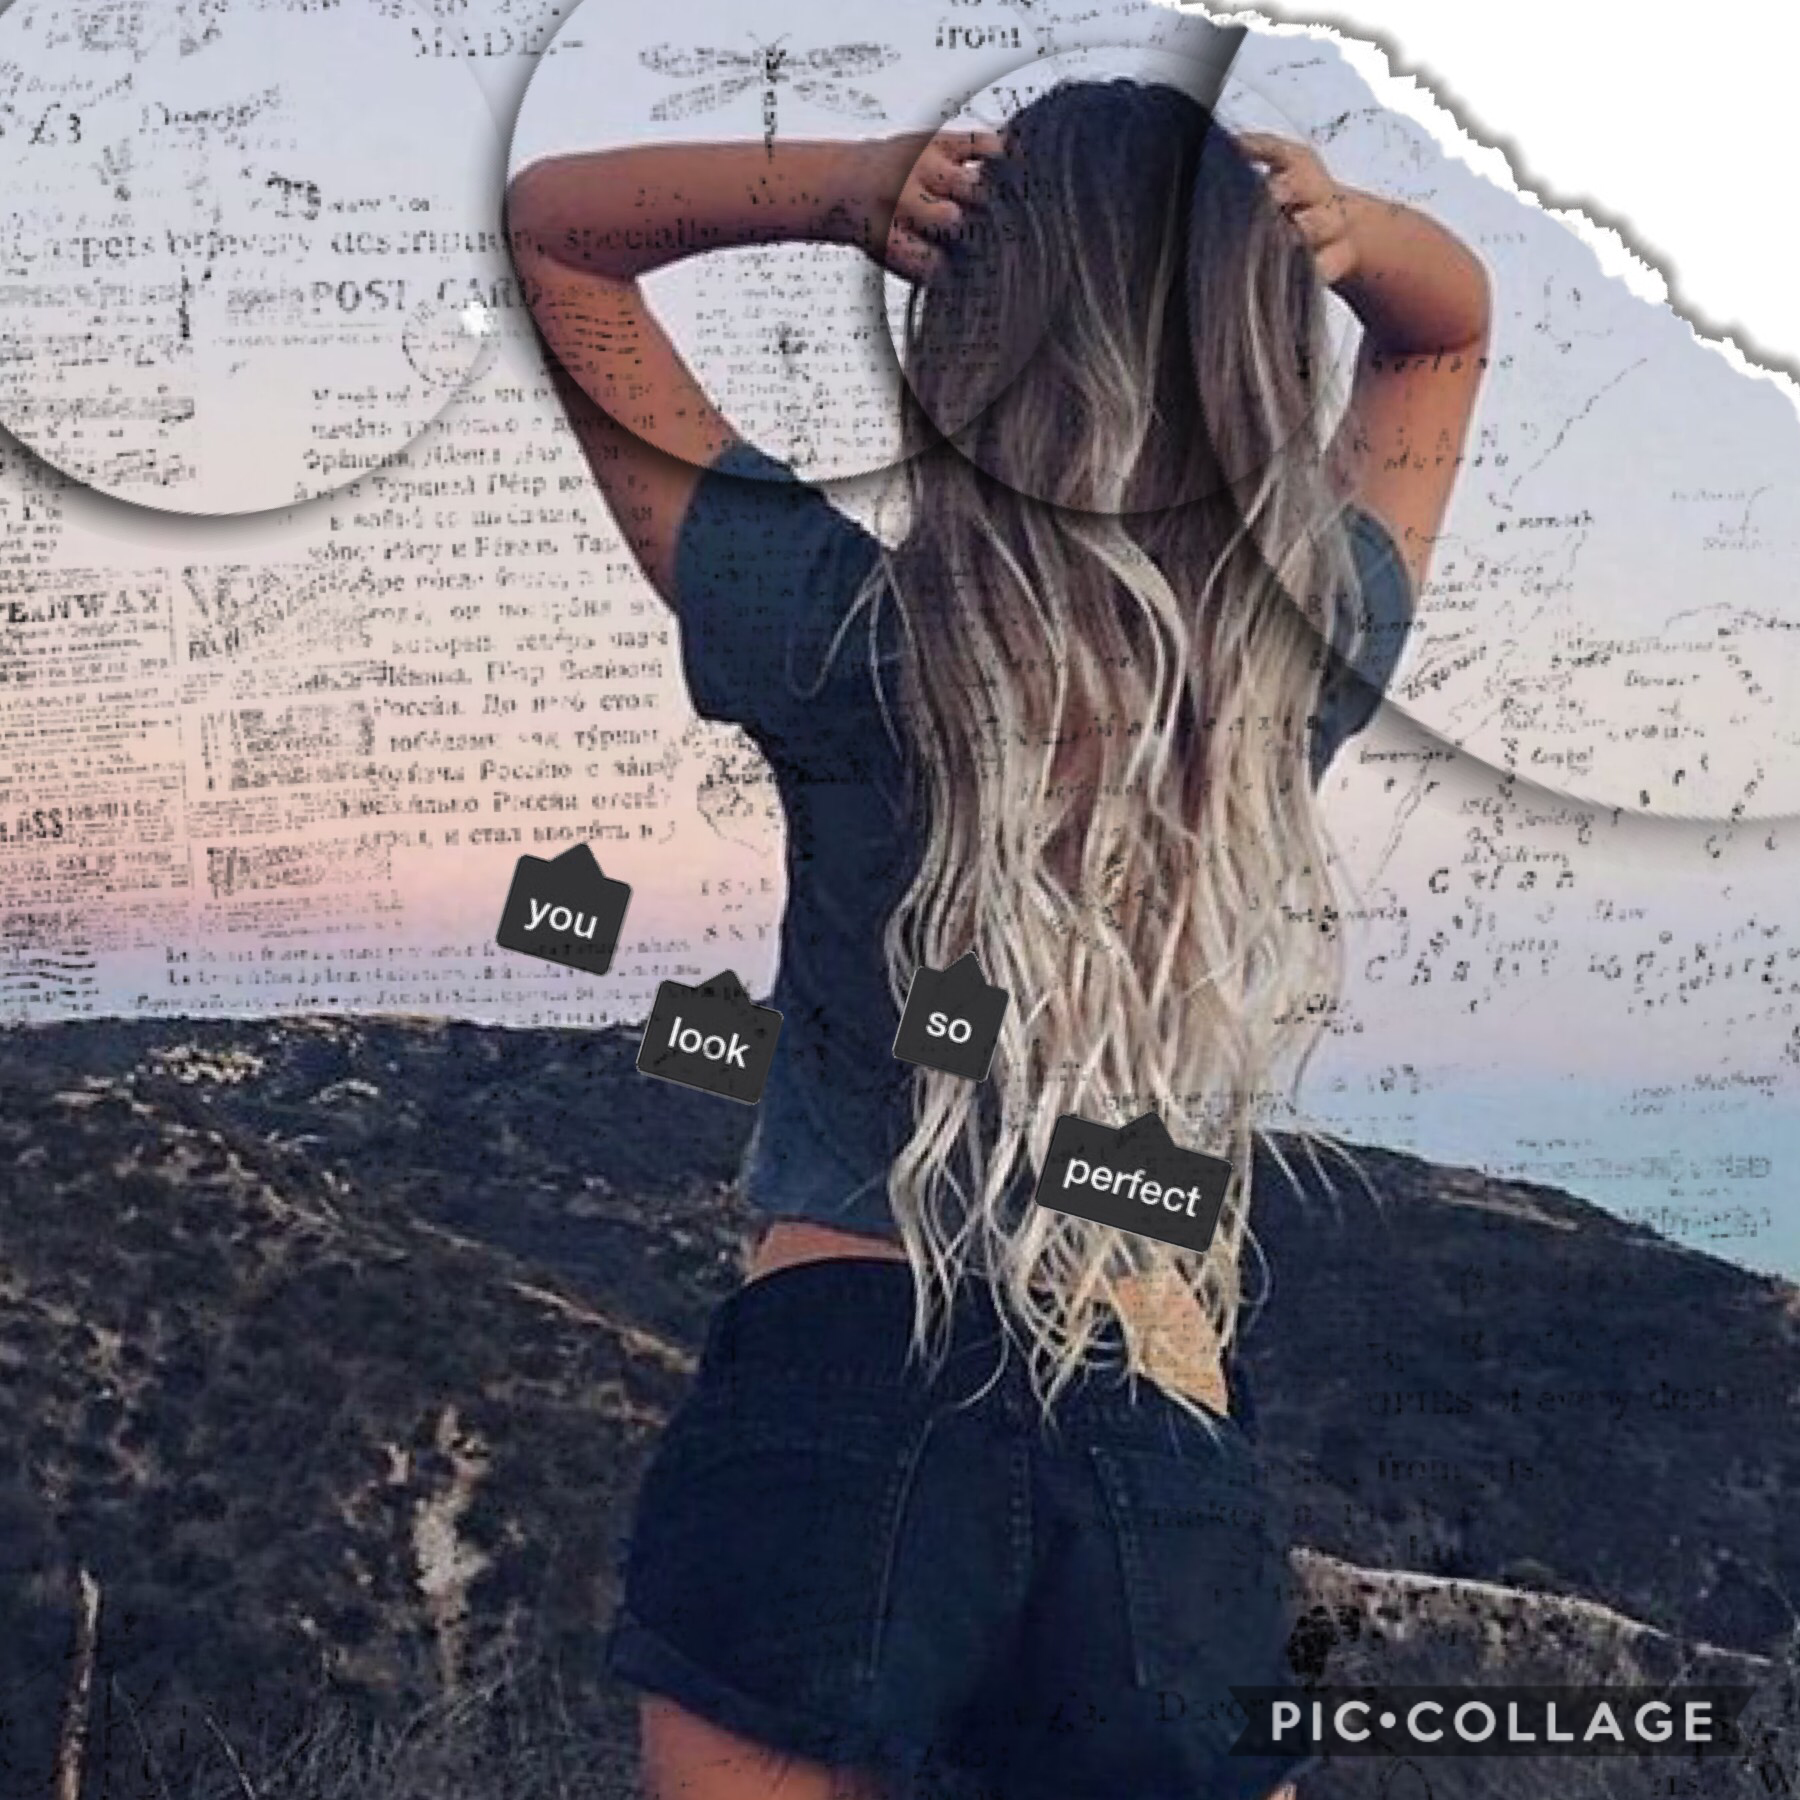 Collage by danikajessup